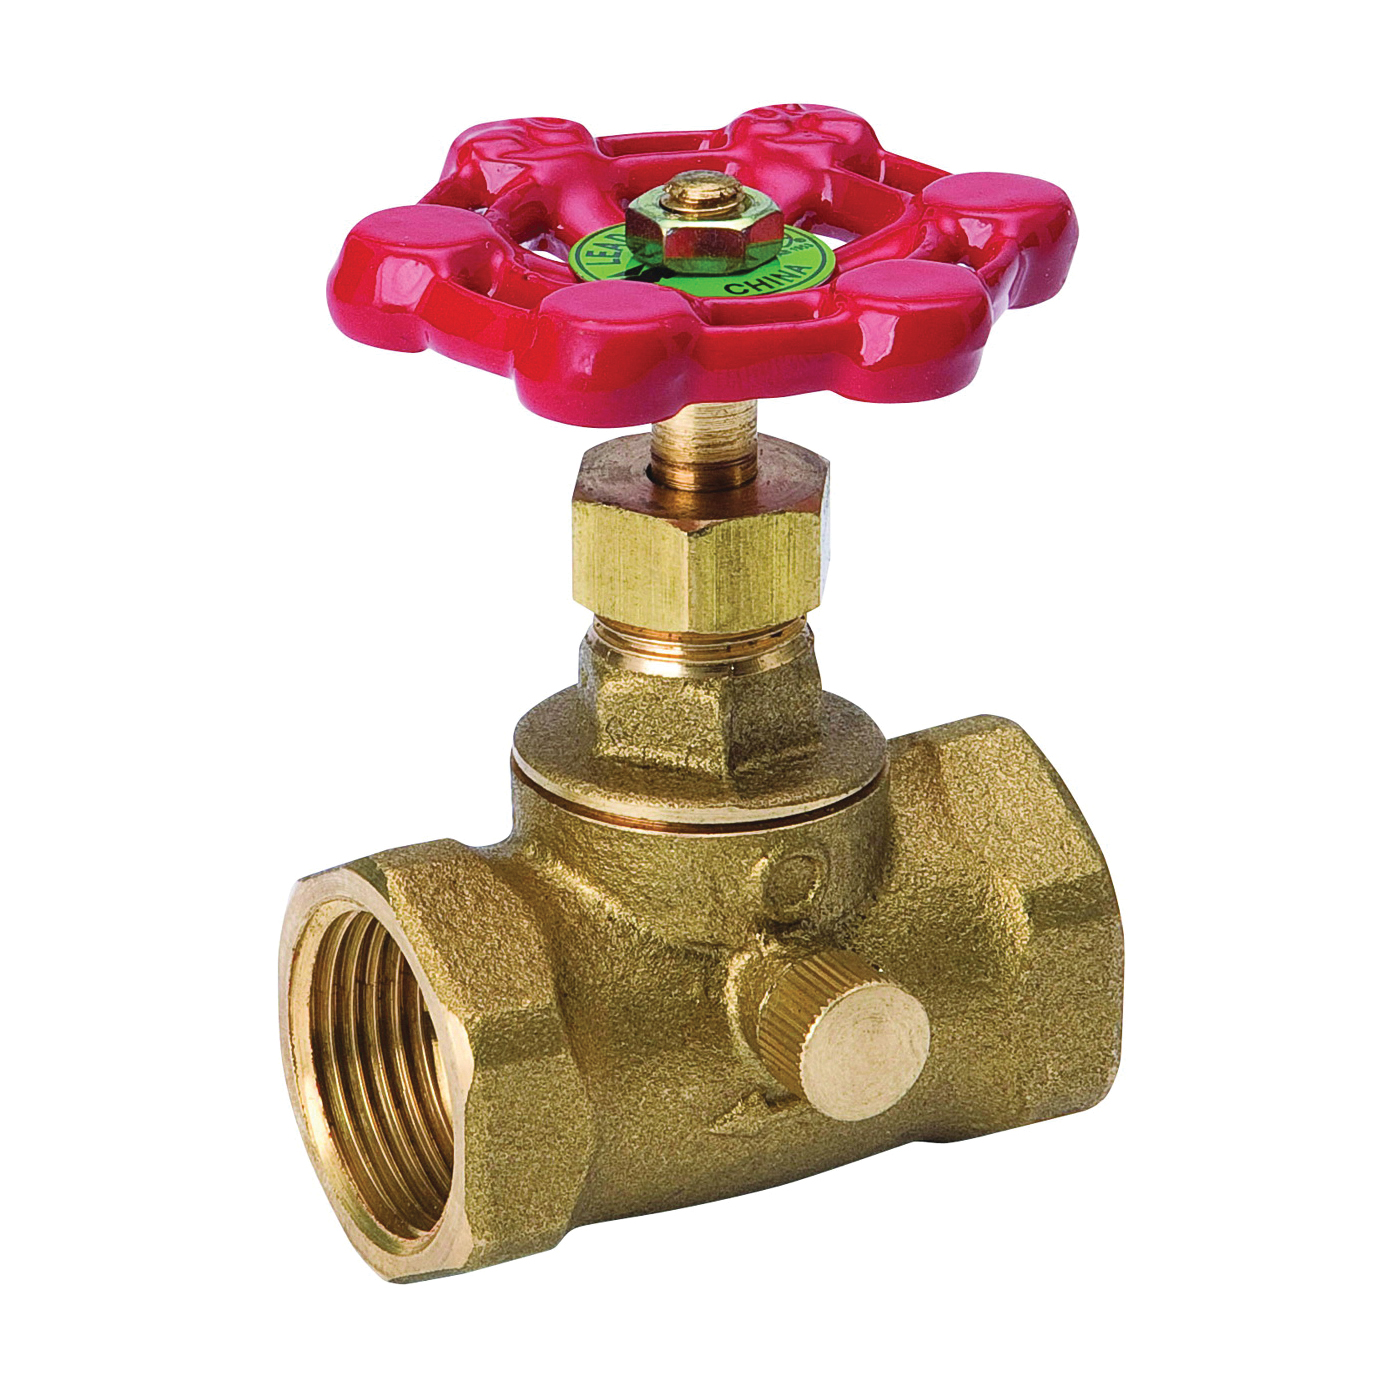 105-104NL Stop and Waste Valve, 3/4 in Connection, FPT x FPT, 125 psi Pressure, Brass Body